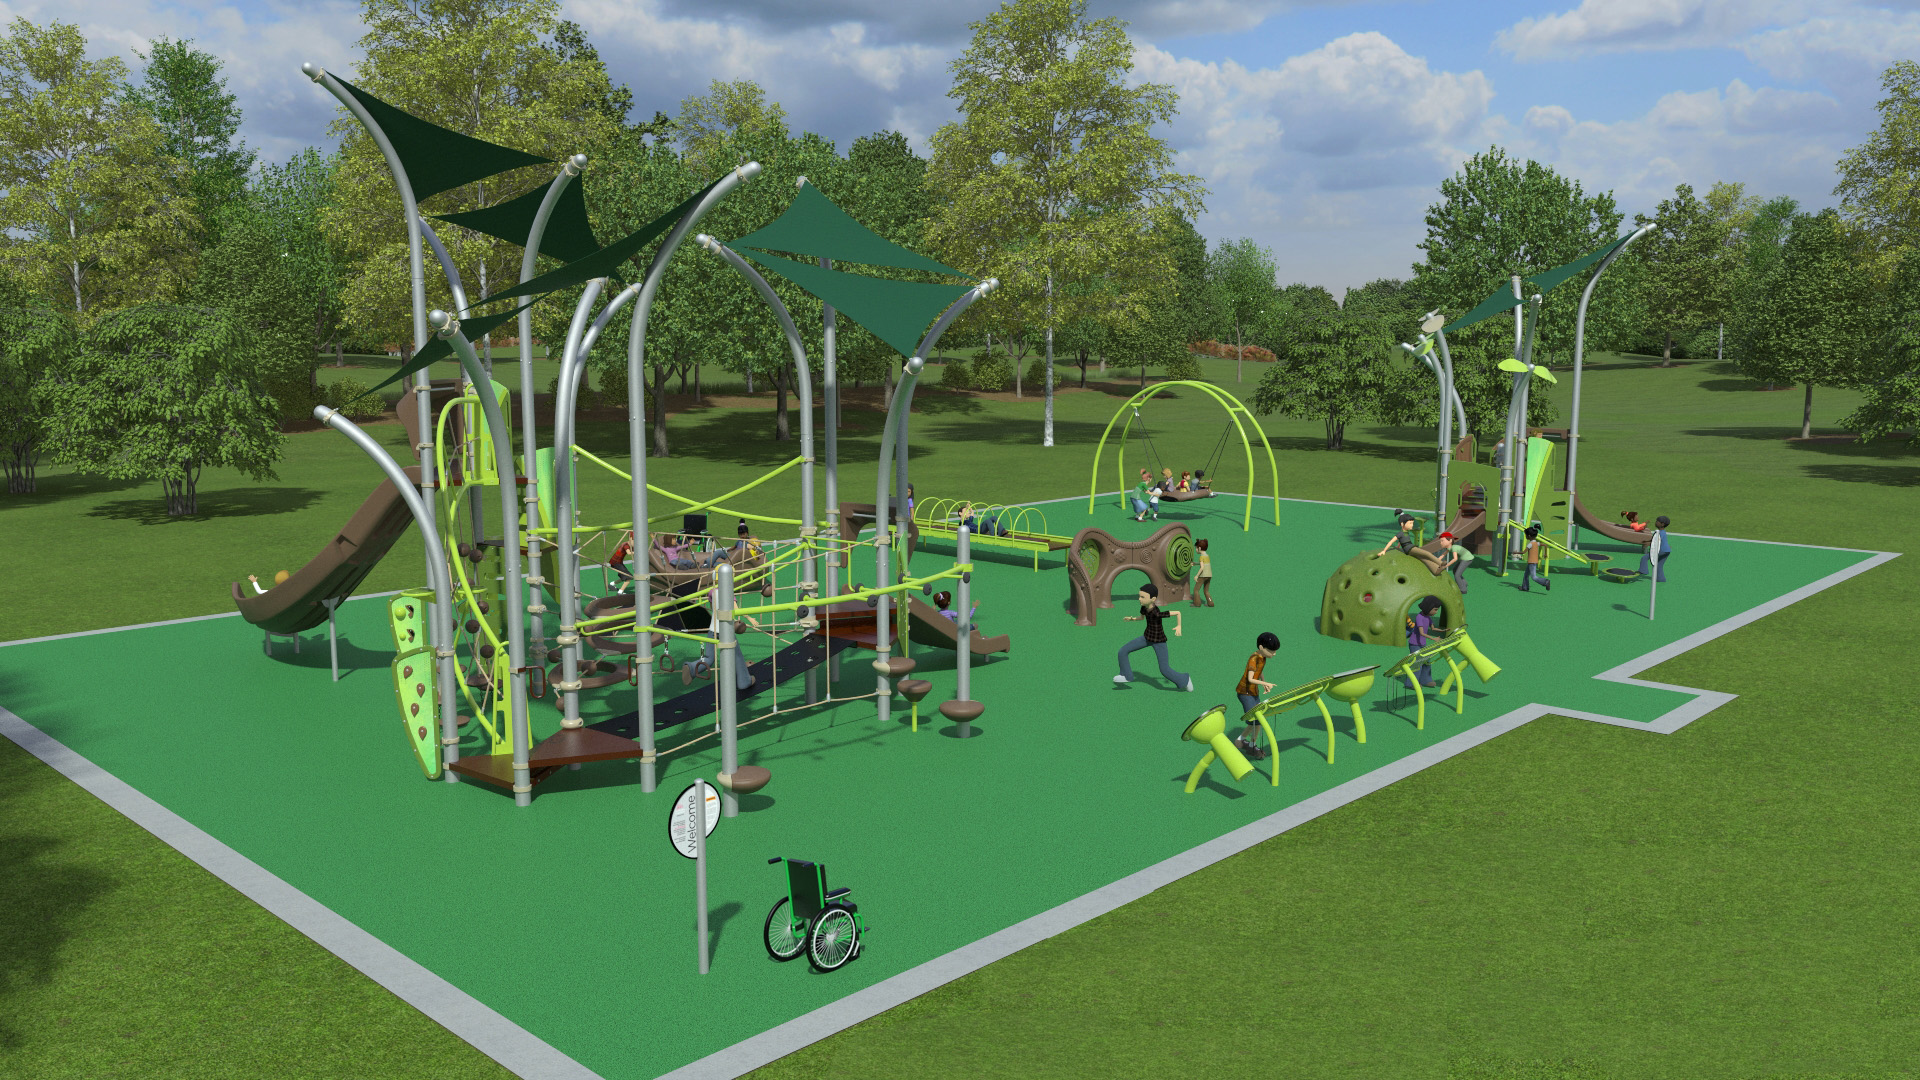 Accessible, Inclusive Playground to Debut at Legacy Park